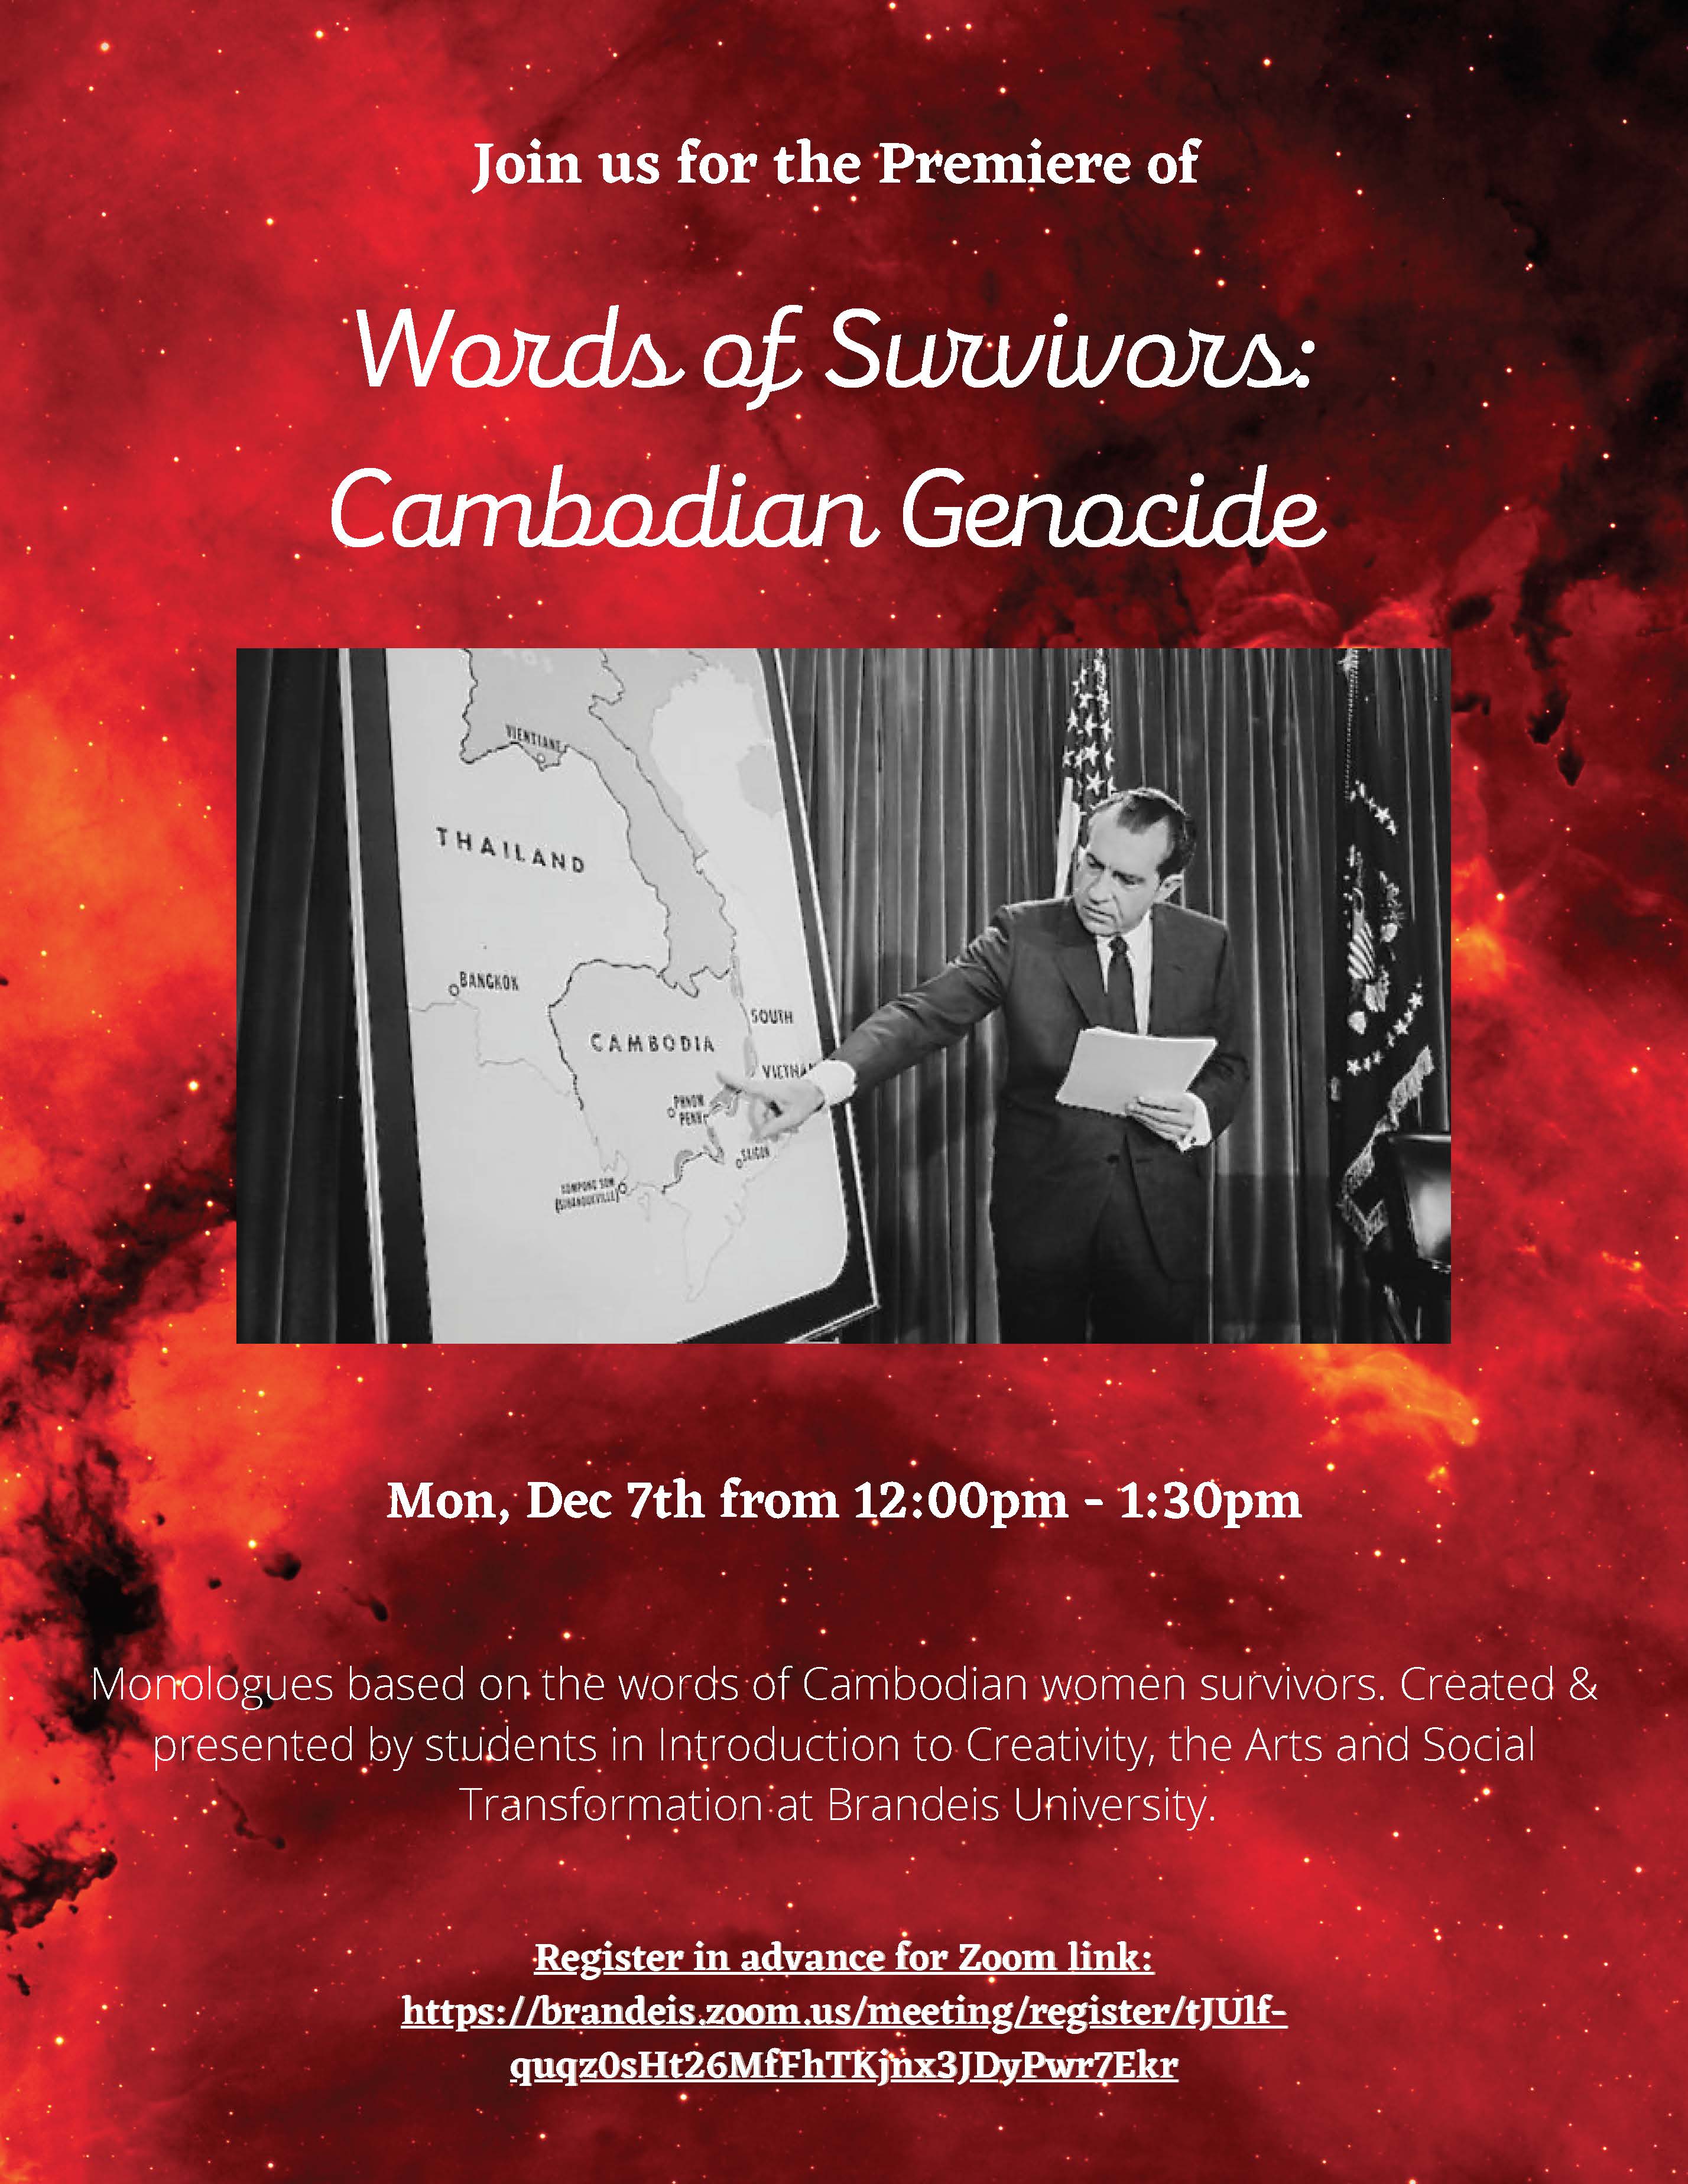 event flyer with a photo of Richard Nixon pointing to a map of Cambodia